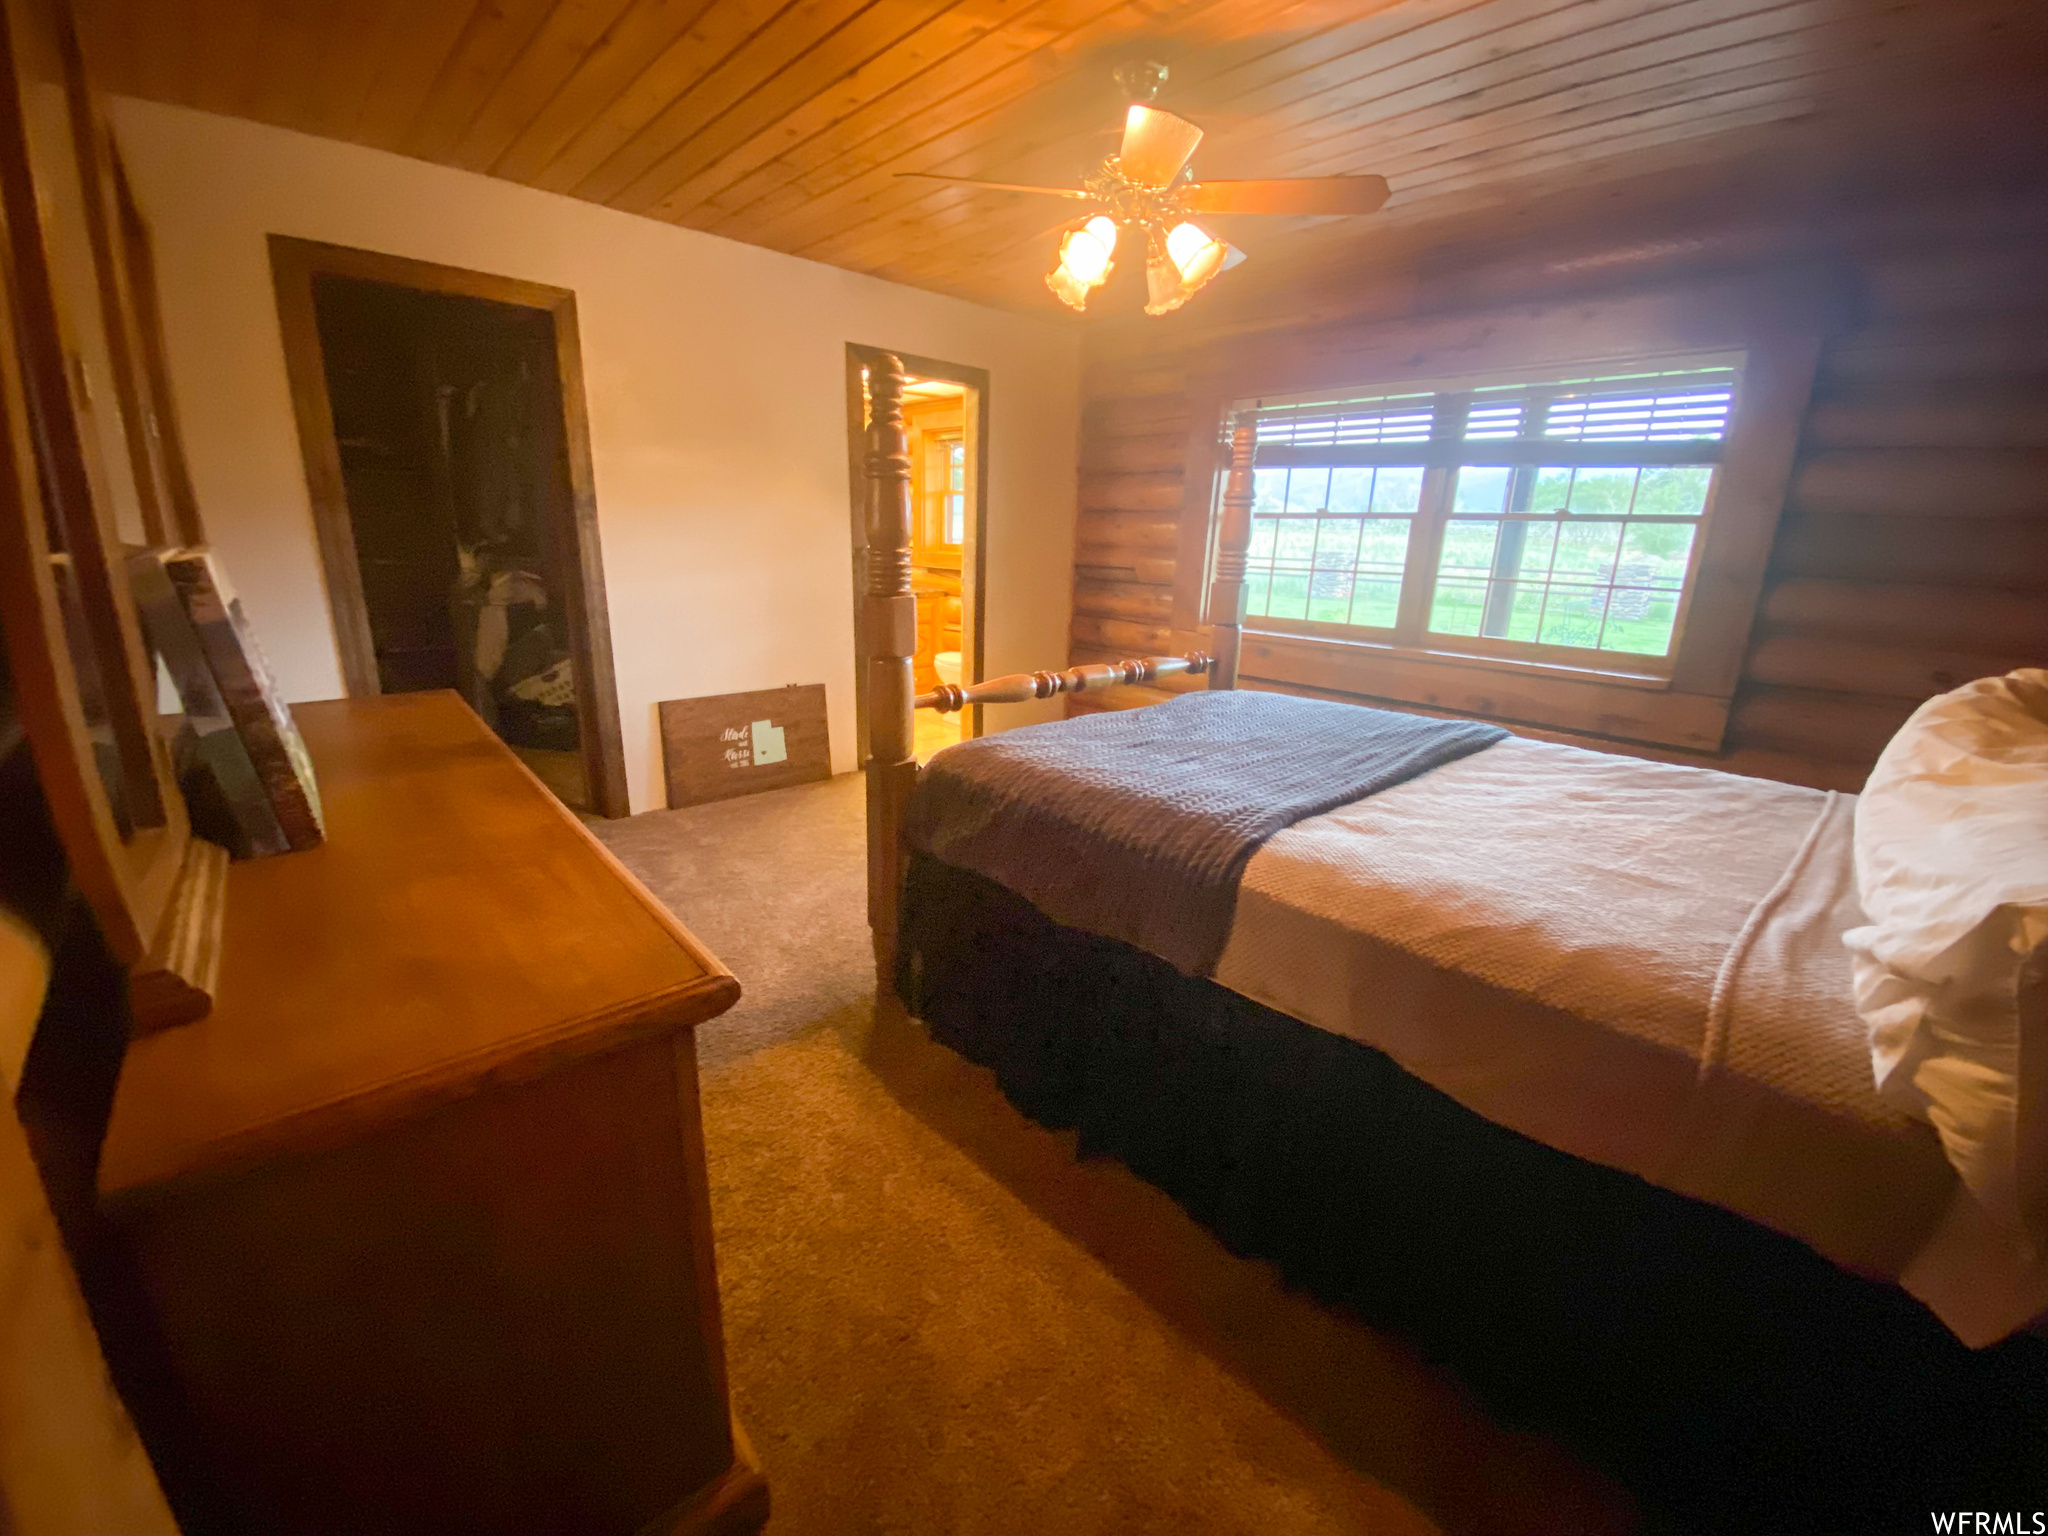 Bedroom featuring light colored carpet, wooden ceiling, and ceiling fan